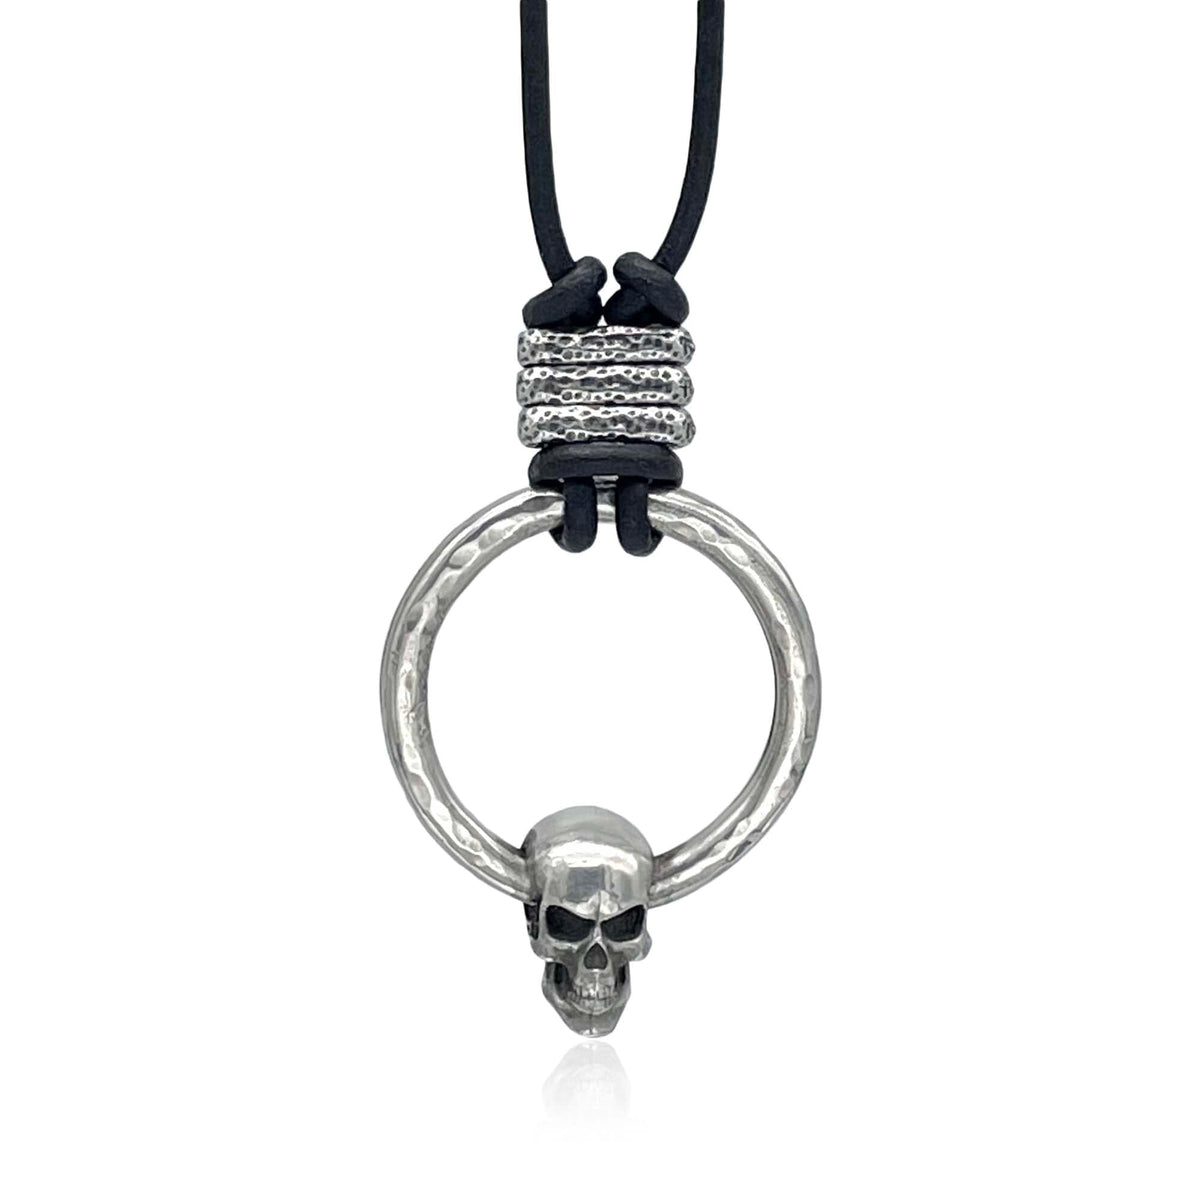 Skull and Hammered Ring Pendant Large